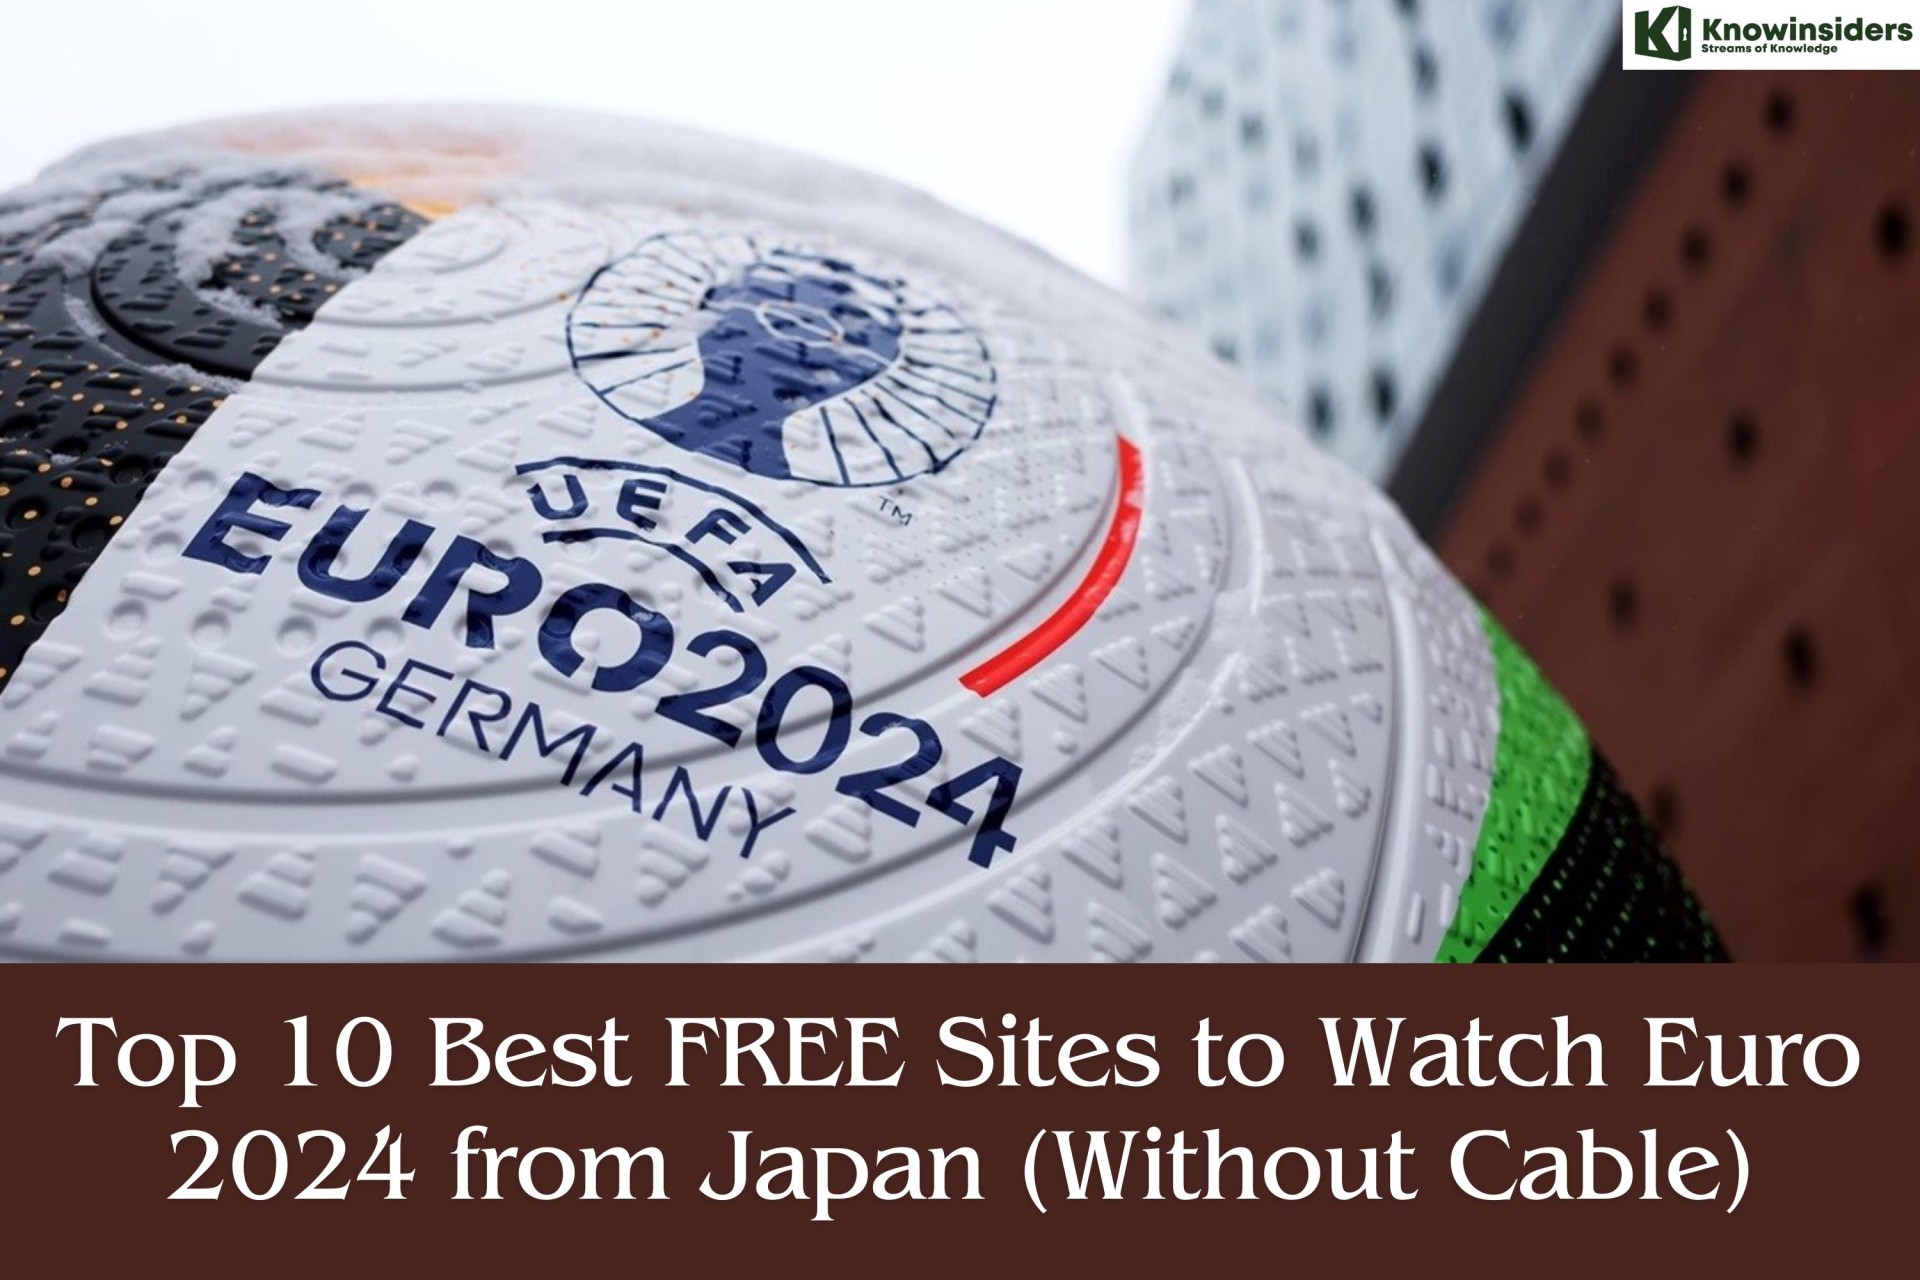 Top 10 Best FREE Sites to Watch Euro 2024 from Japan (Without Cable